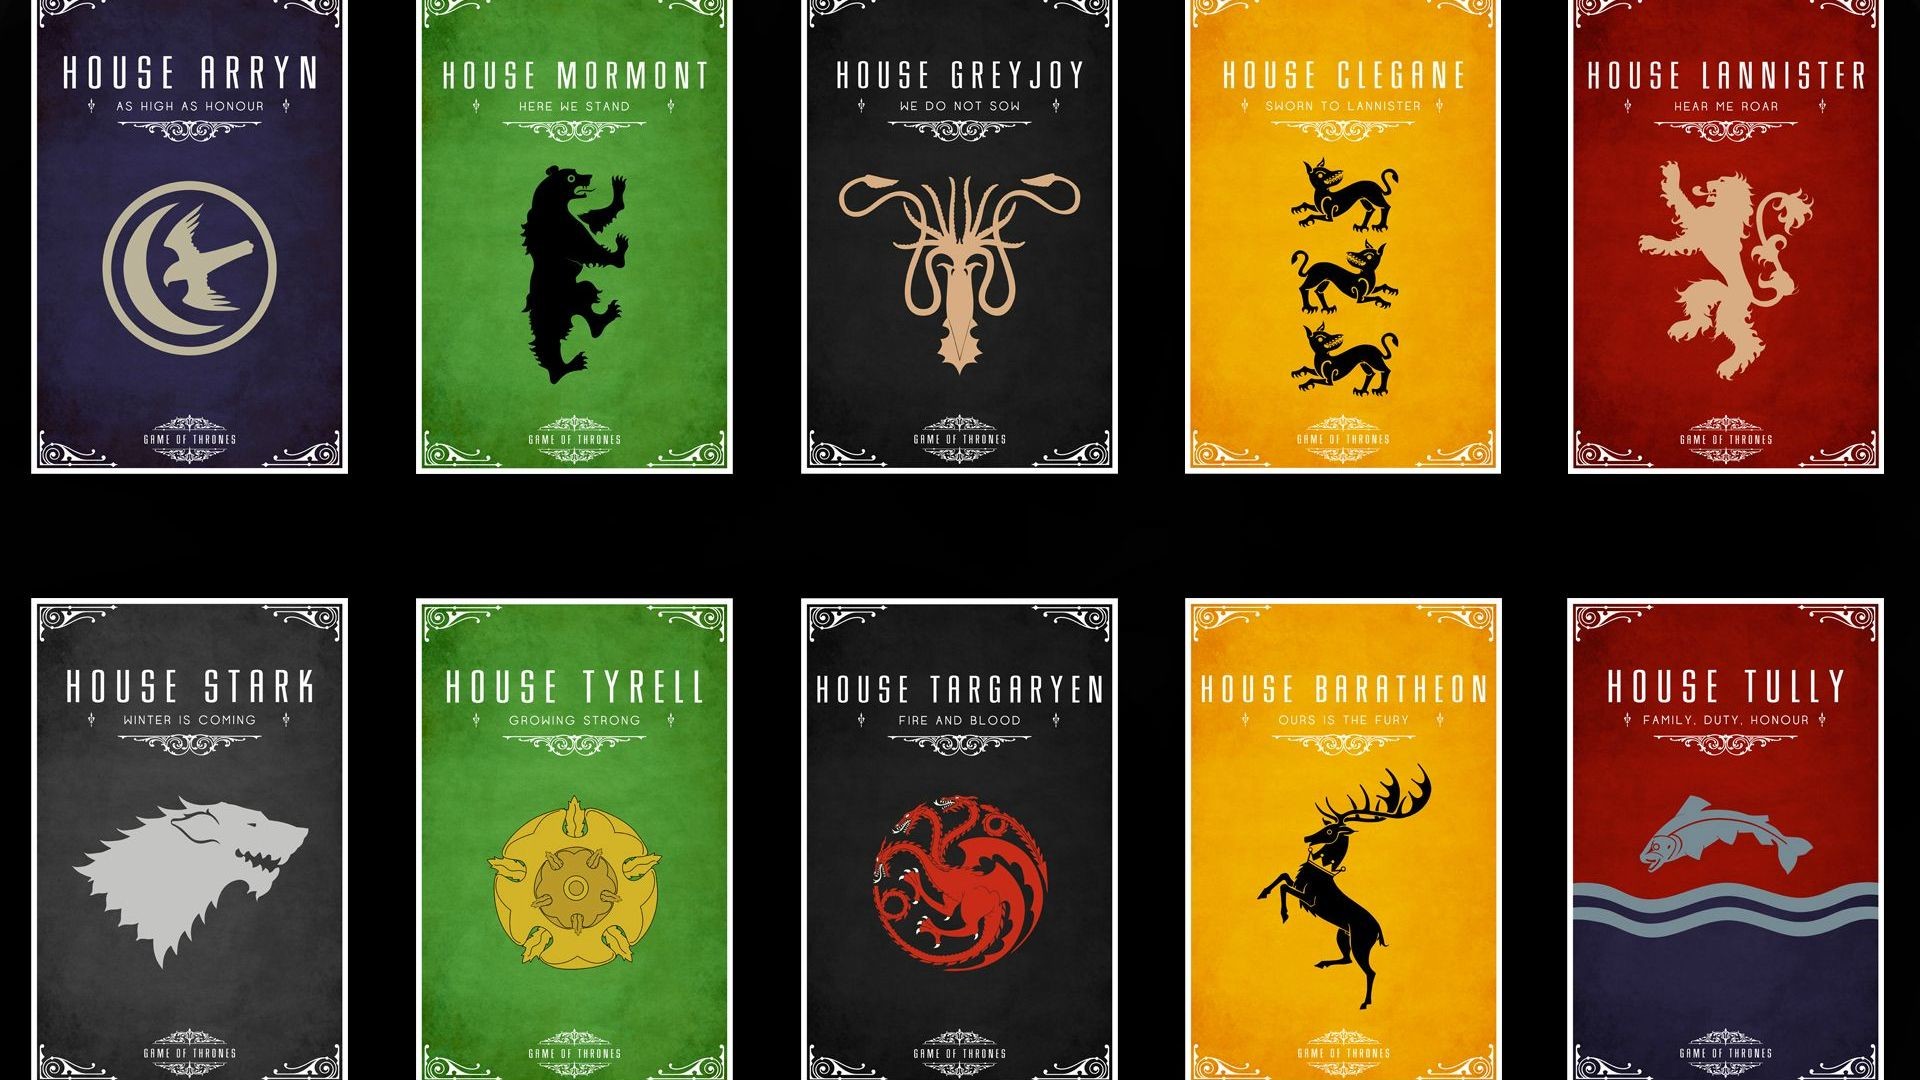 1920x1080 Game of Thrones houses HD Wallpaper  Game ...